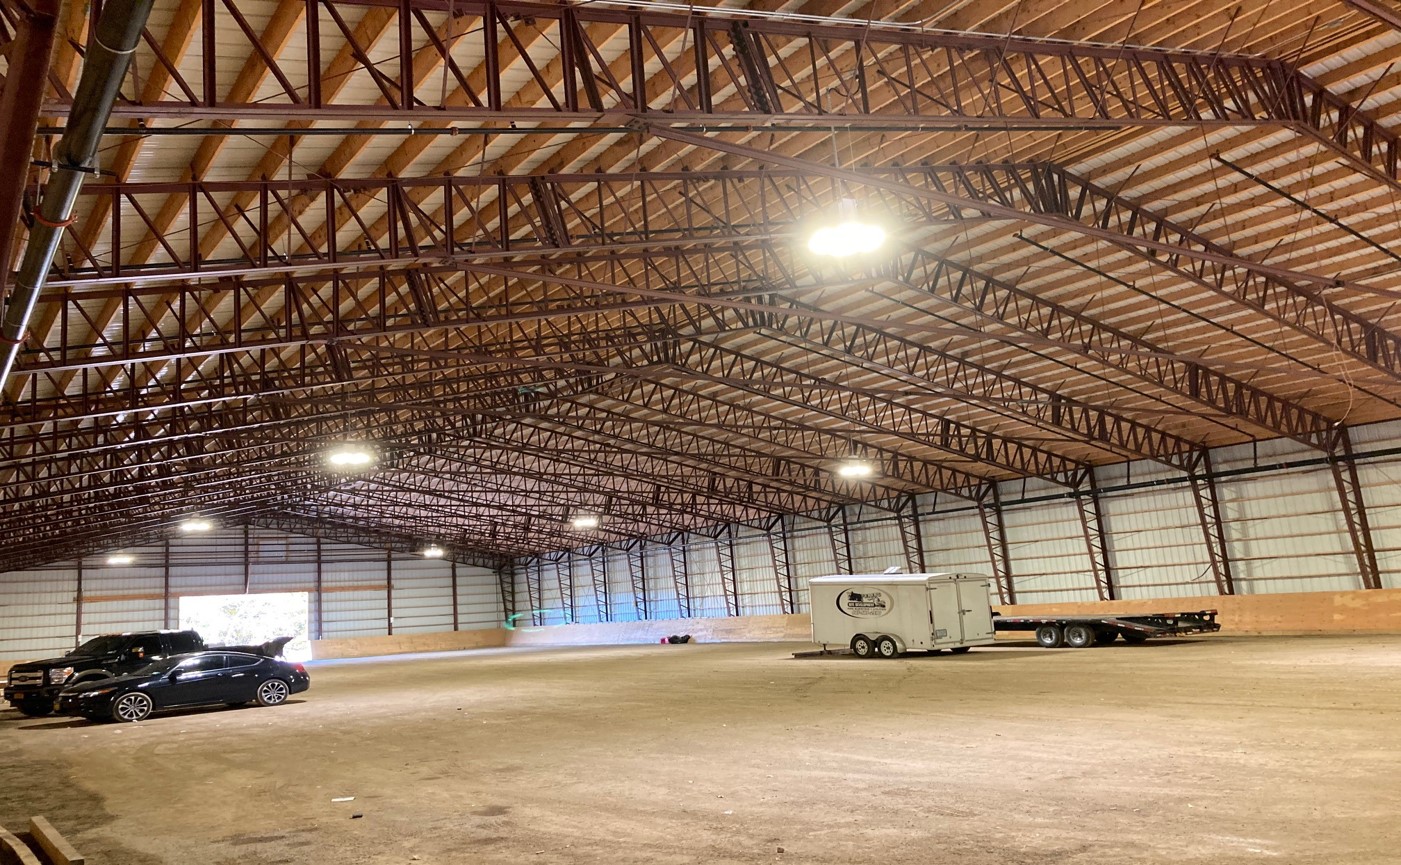 Interior Arena -Near Completion - October 2020